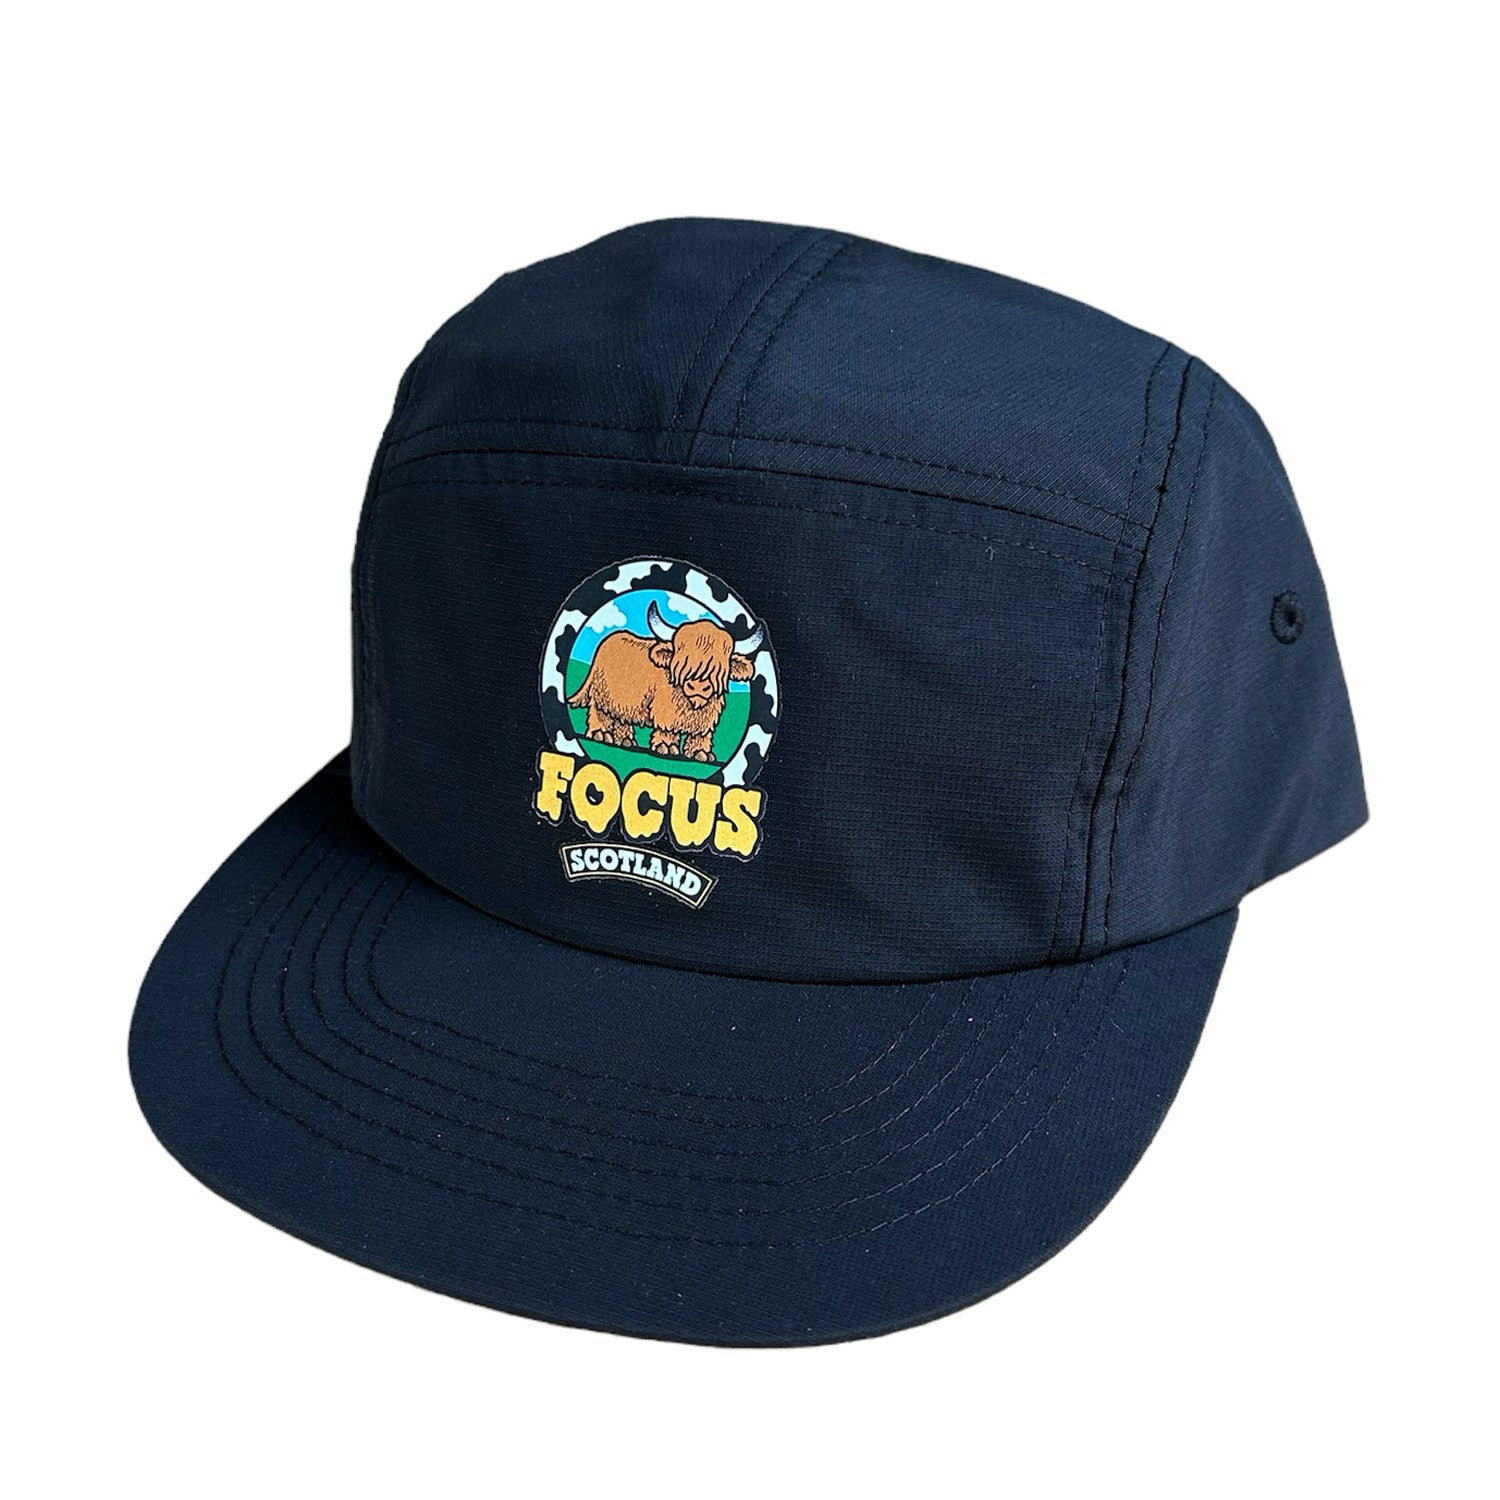 Focus Melted Coo Ripstop 5 Panel Cap - Black